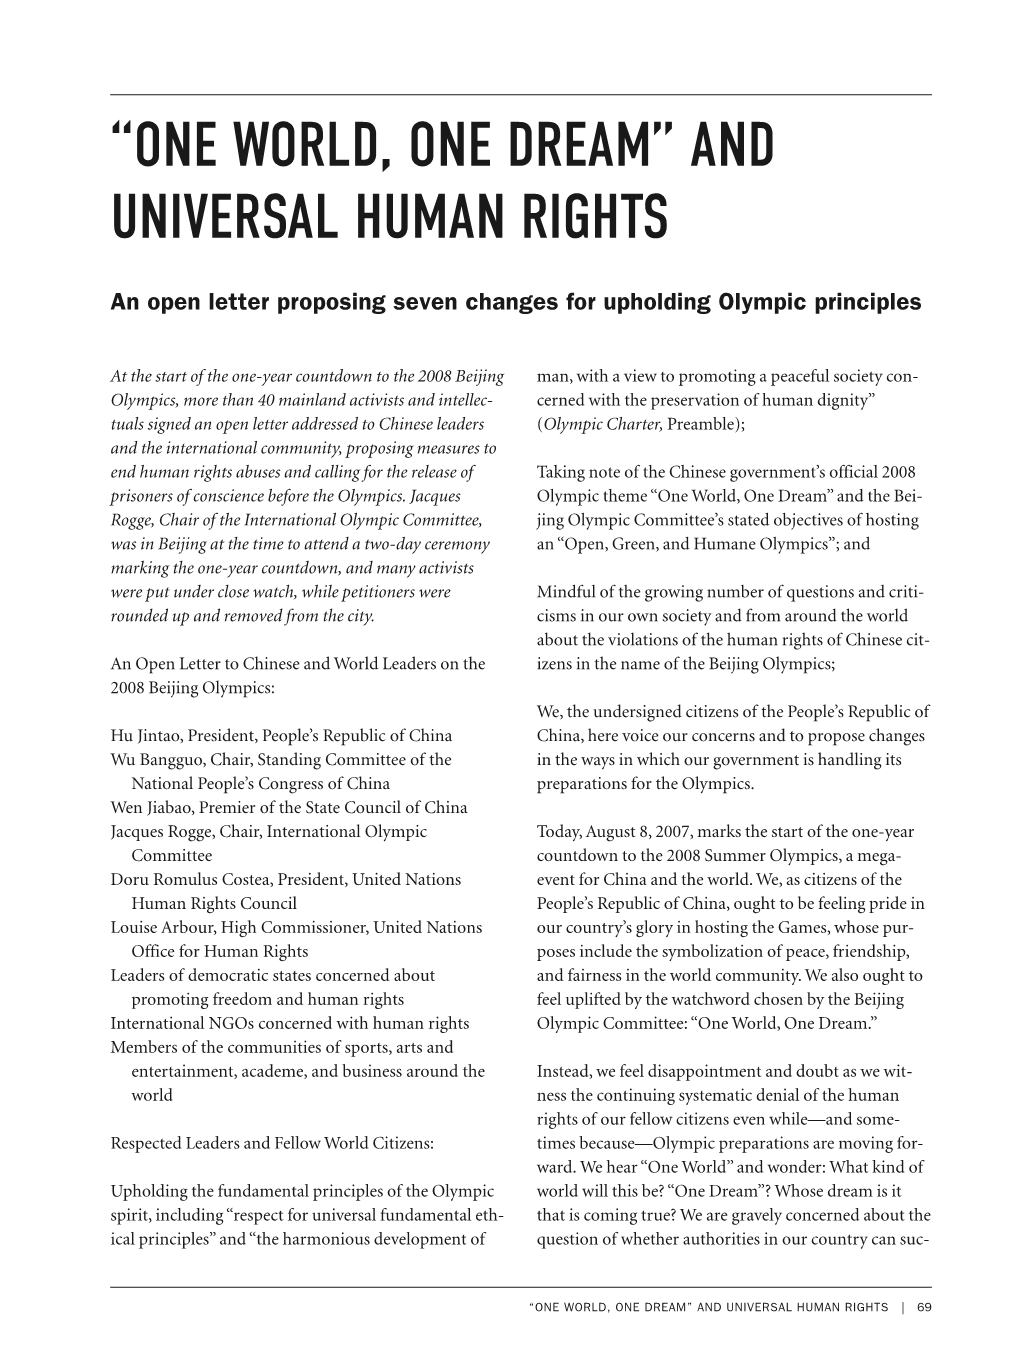 “One World, One Dream” and Universal Human Rights